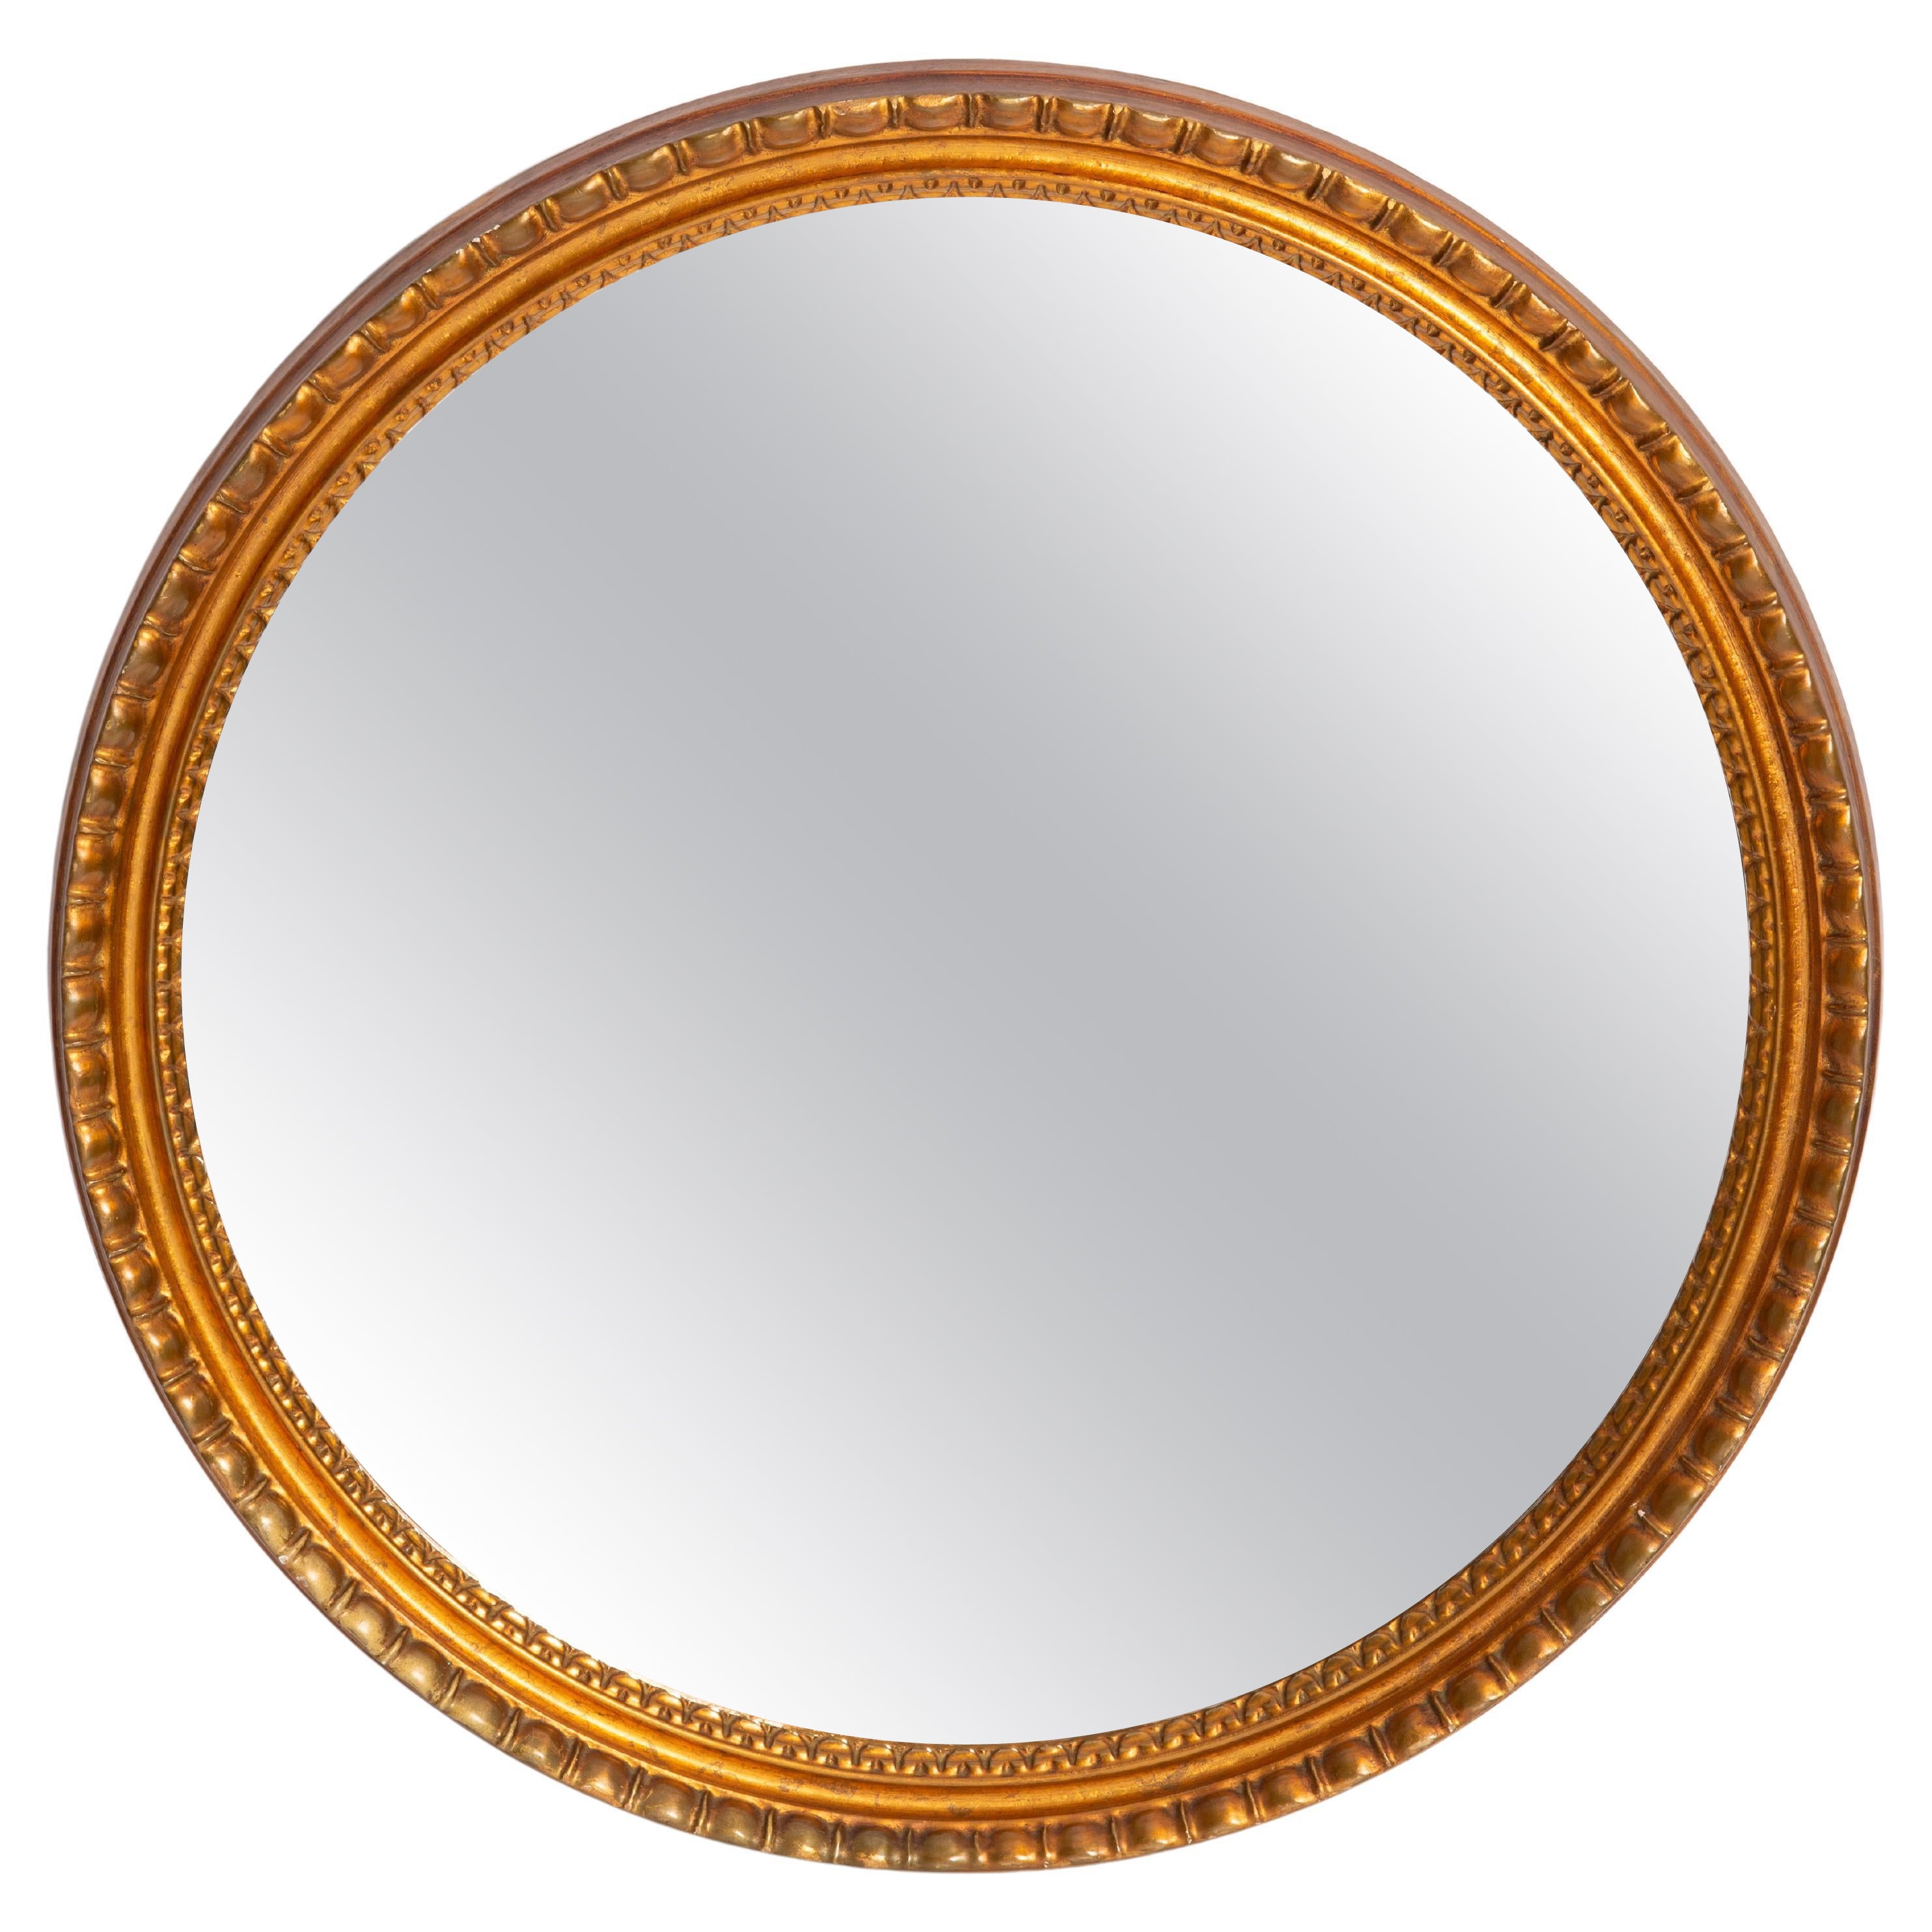 Vintage Oval Gold and Black Decorative Mirror in Flowers Frame, Italy, 1960s For Sale